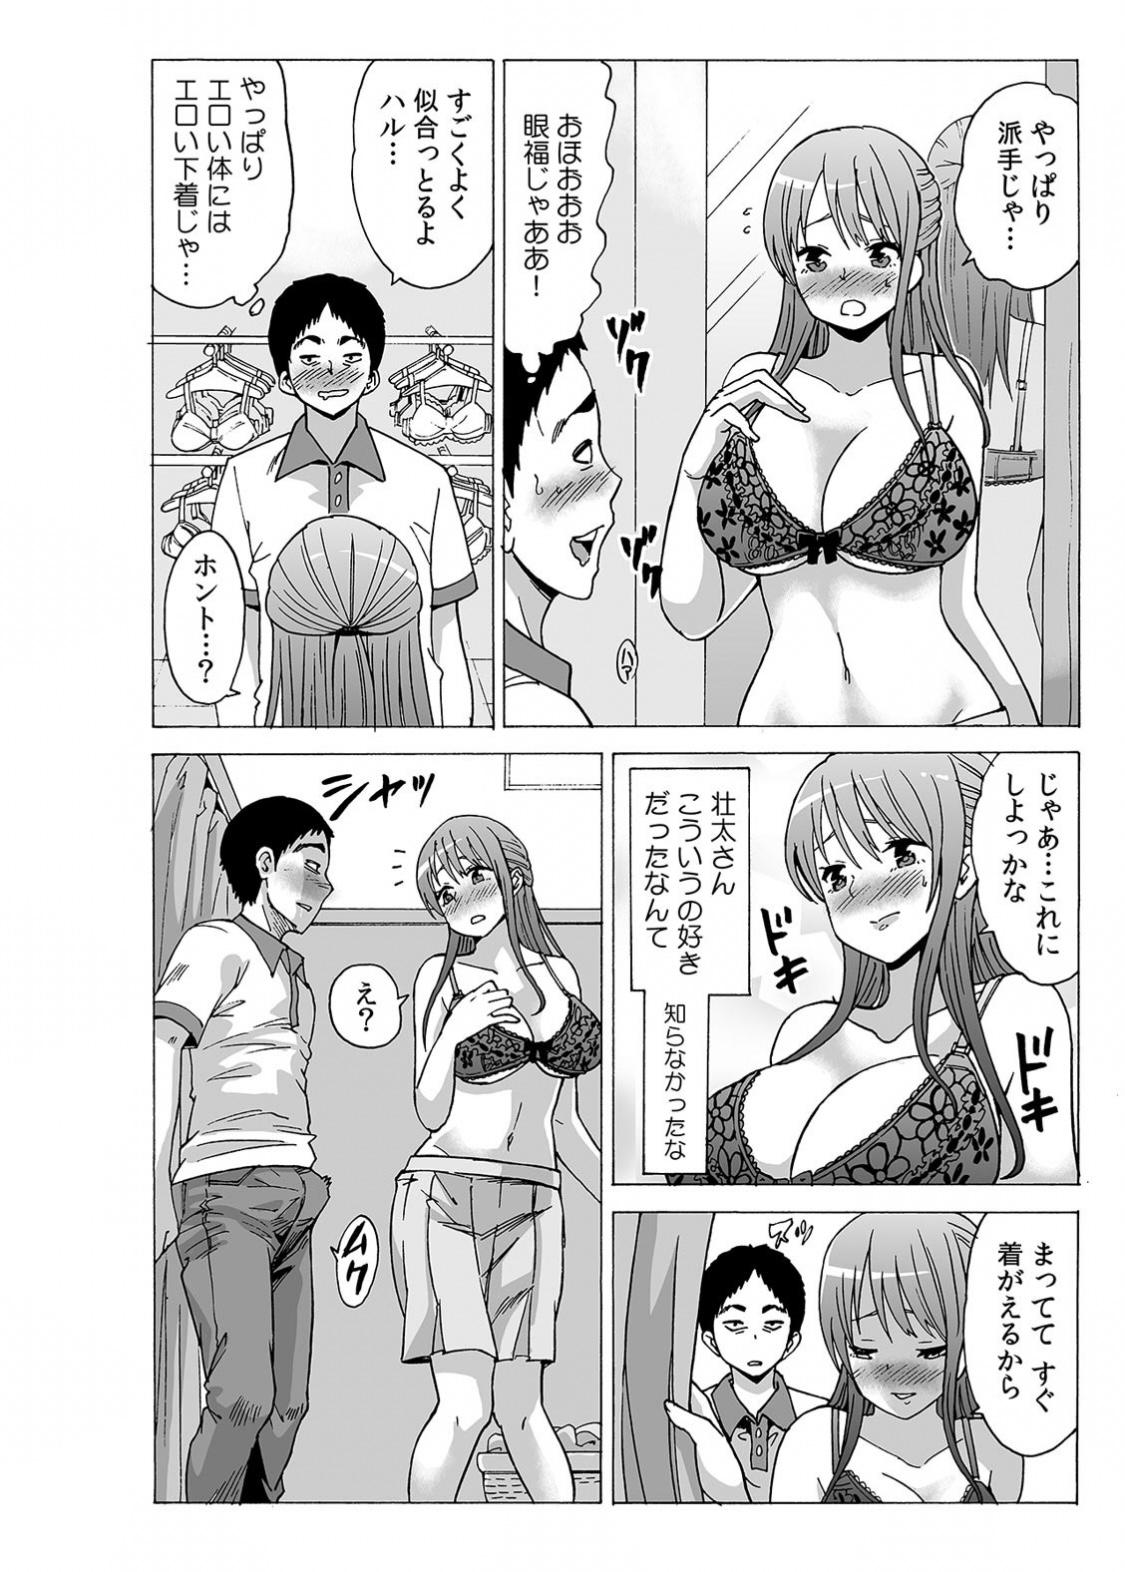 Camporn [Motaro / Akahige] My first partner is ... my father-in-law!? 2 Con - Page 2